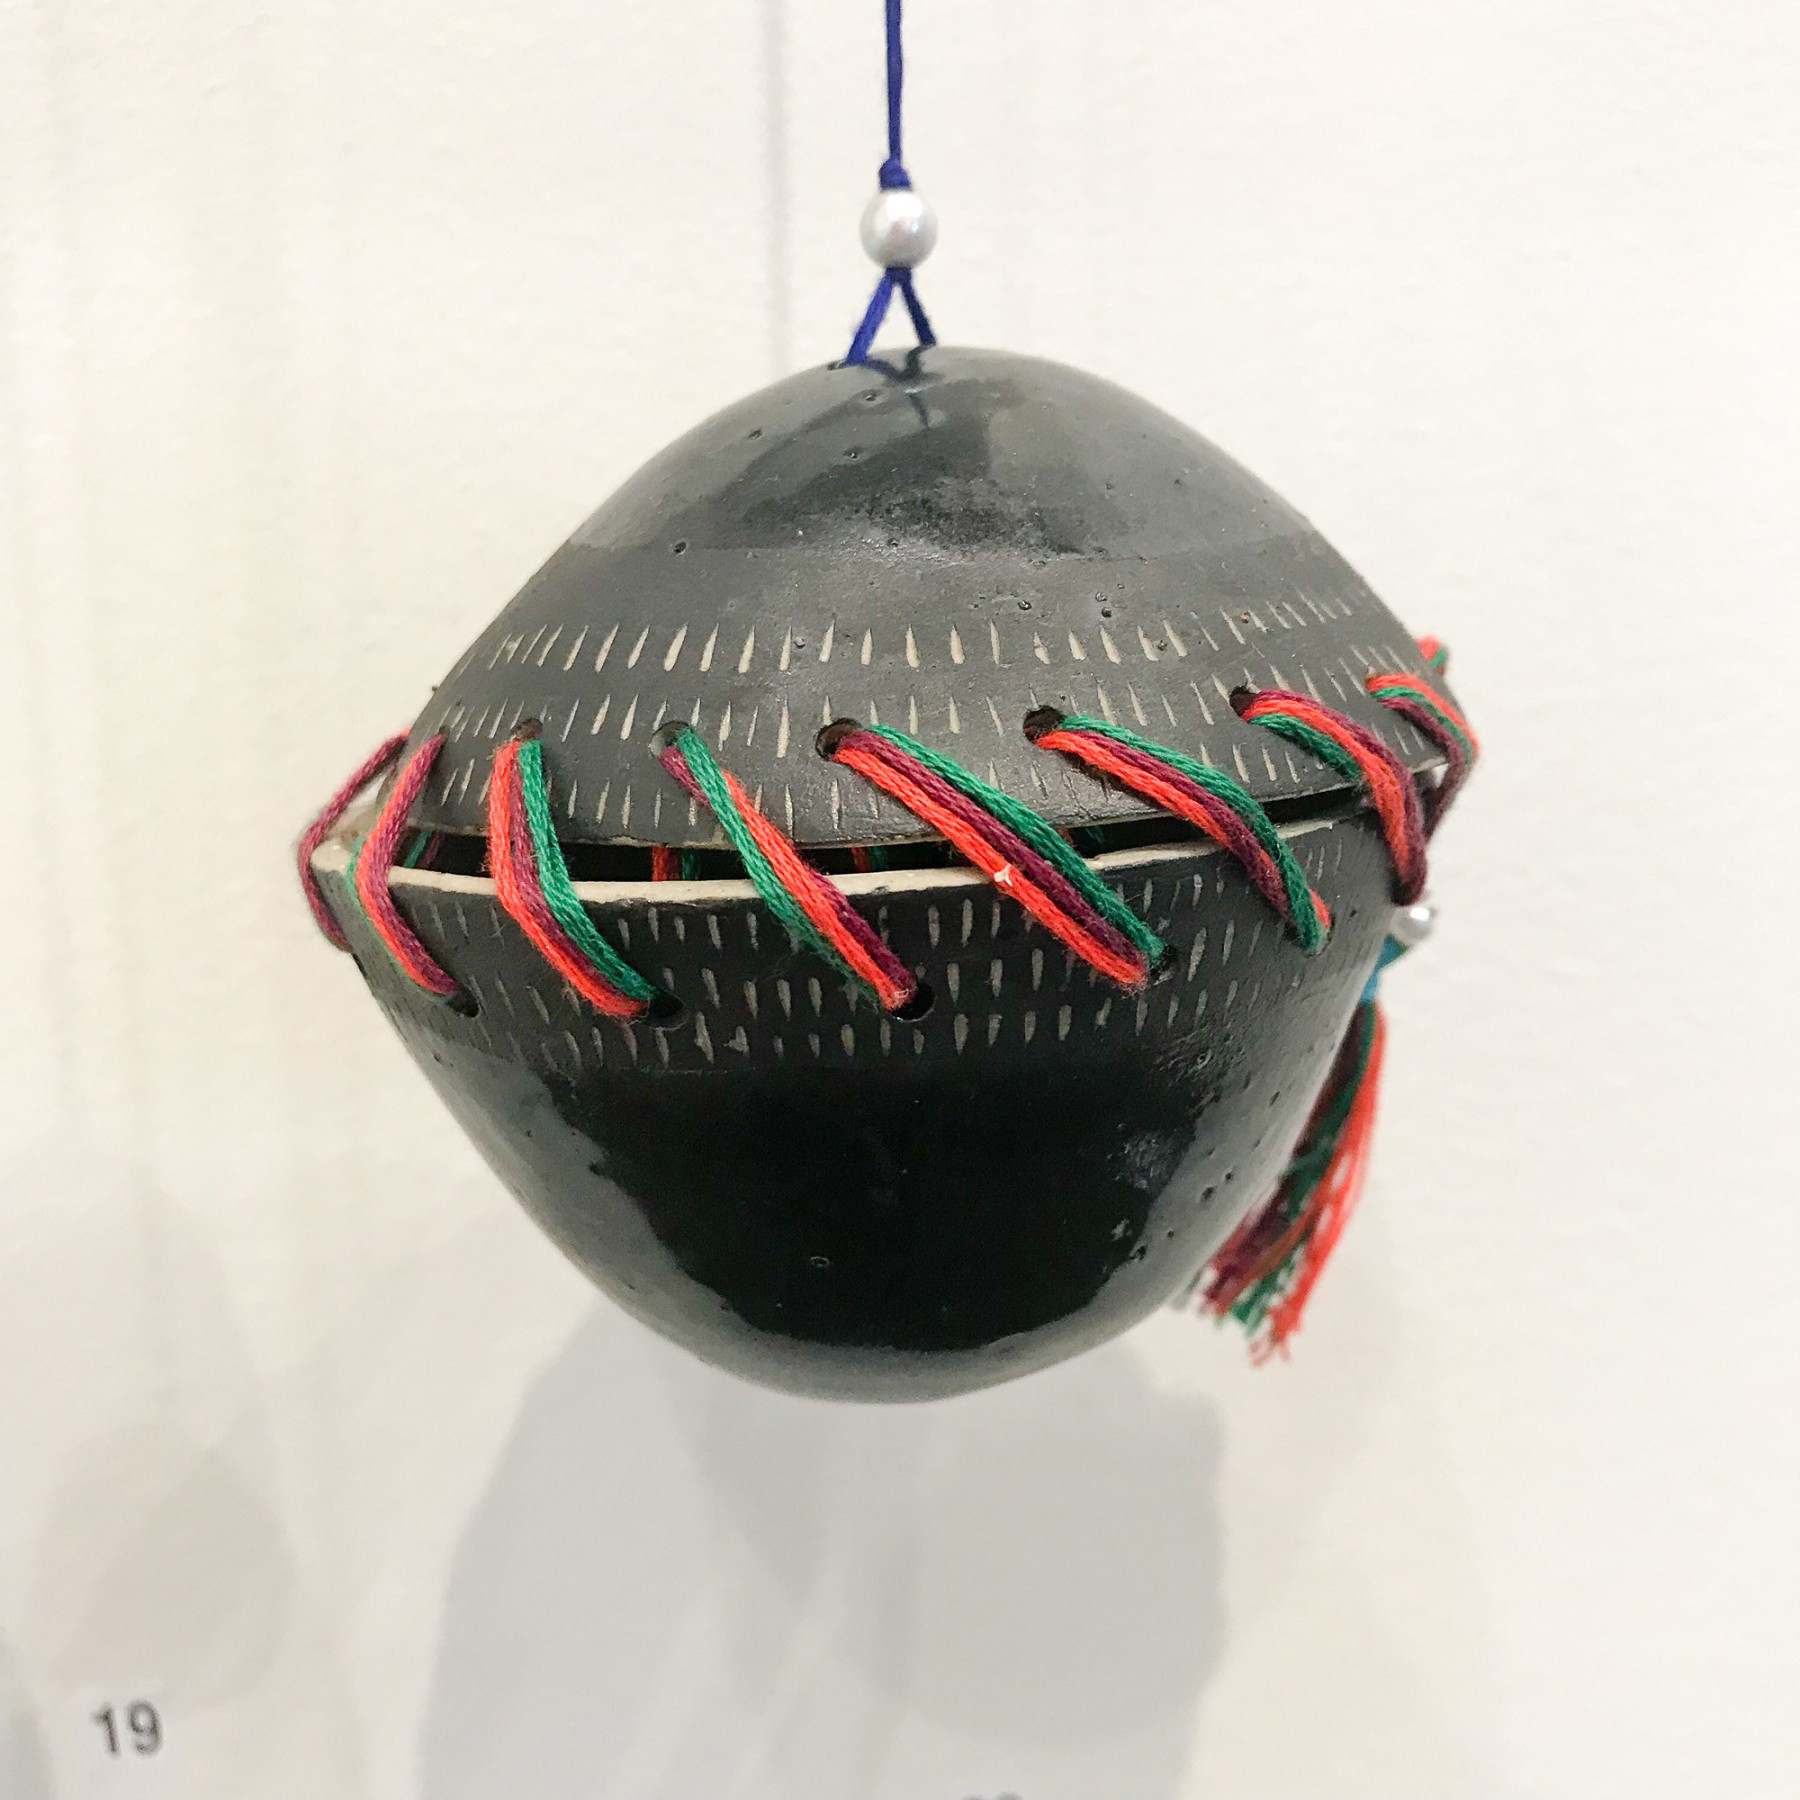 Amanda Humphries, Loop Circuit (Upside Down Descartes) recycled stoneware with thread 2018